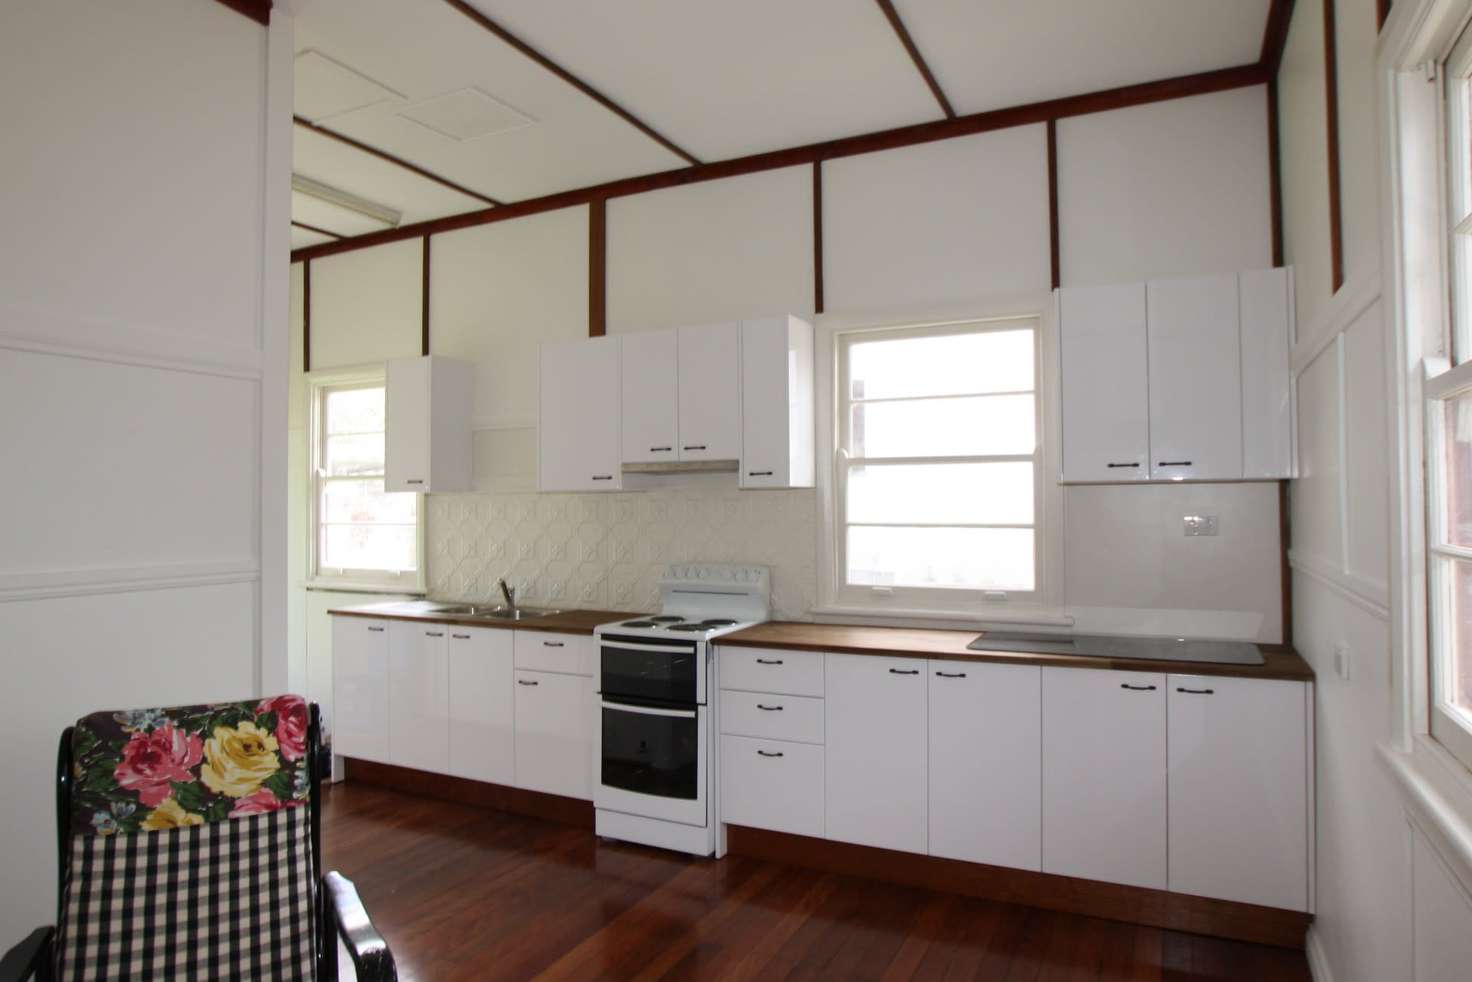 Main view of Homely house listing, 8 Wilfred Street, Billinudgel NSW 2483